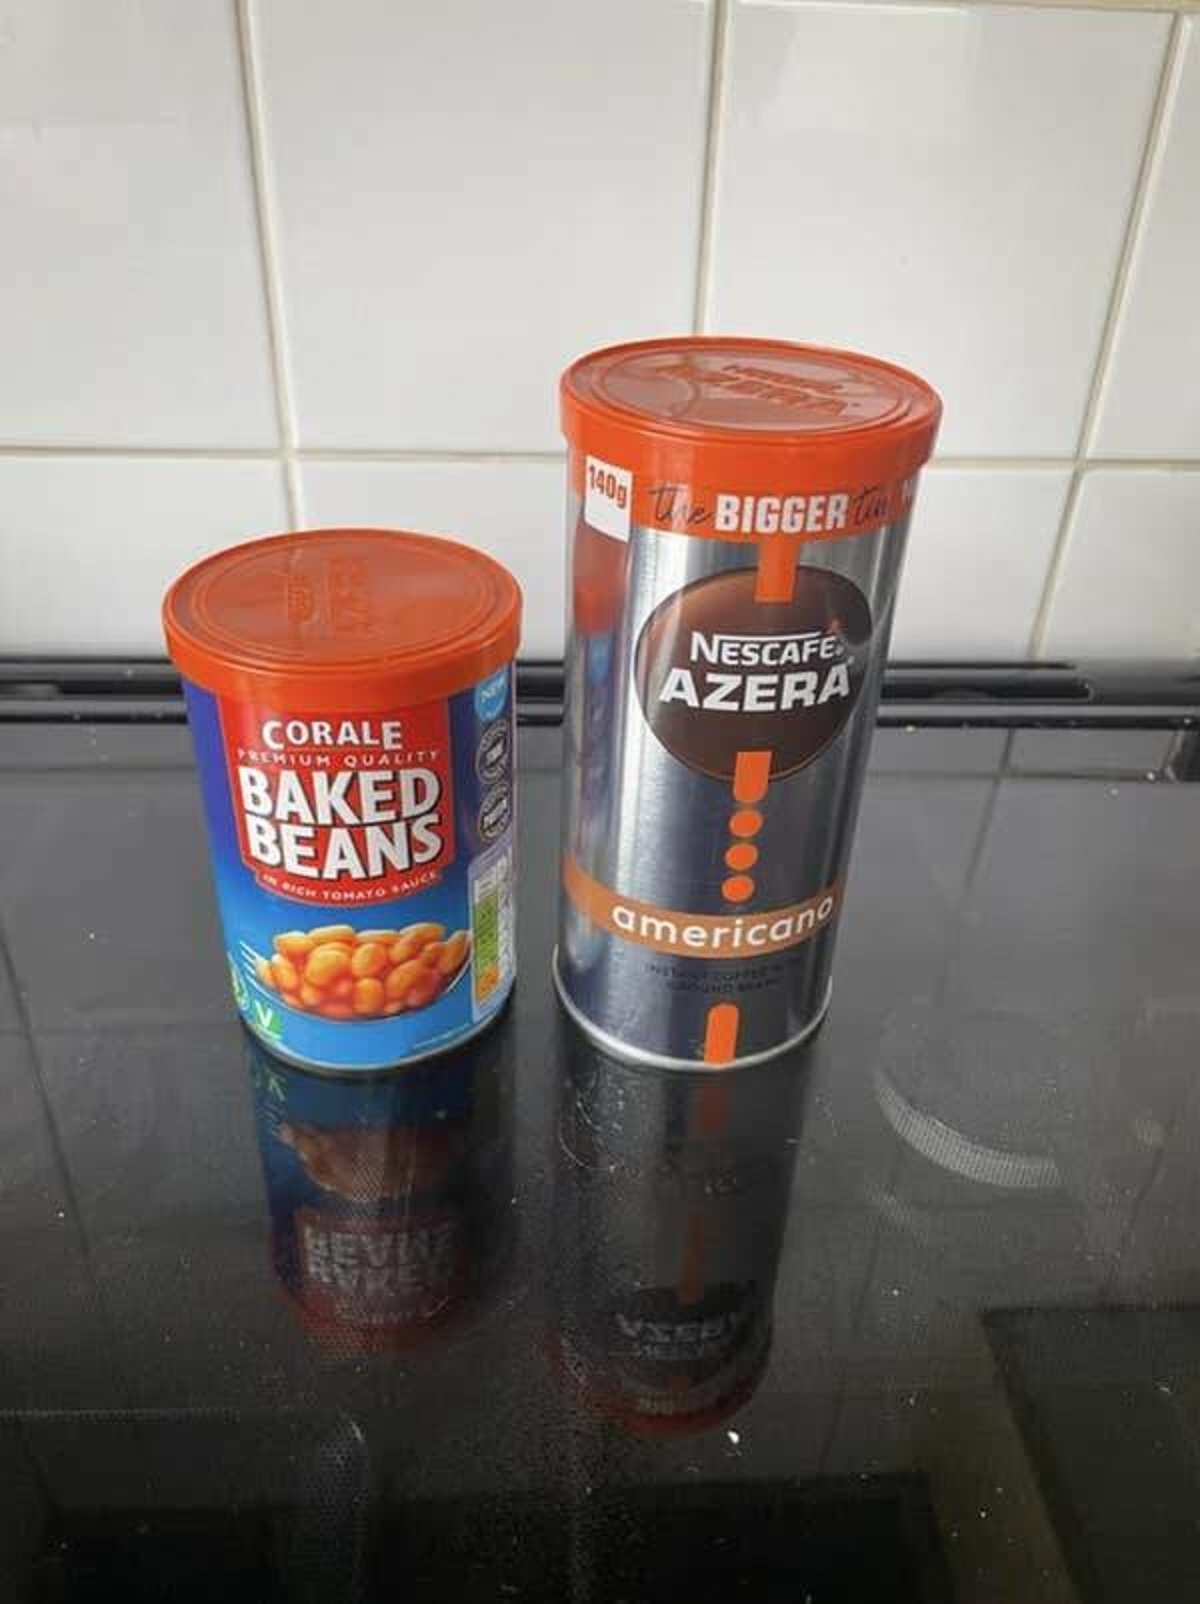 "If you've got instant coffee on hand, "Silicone coffee lids are a perfect fit for many tinned products!""